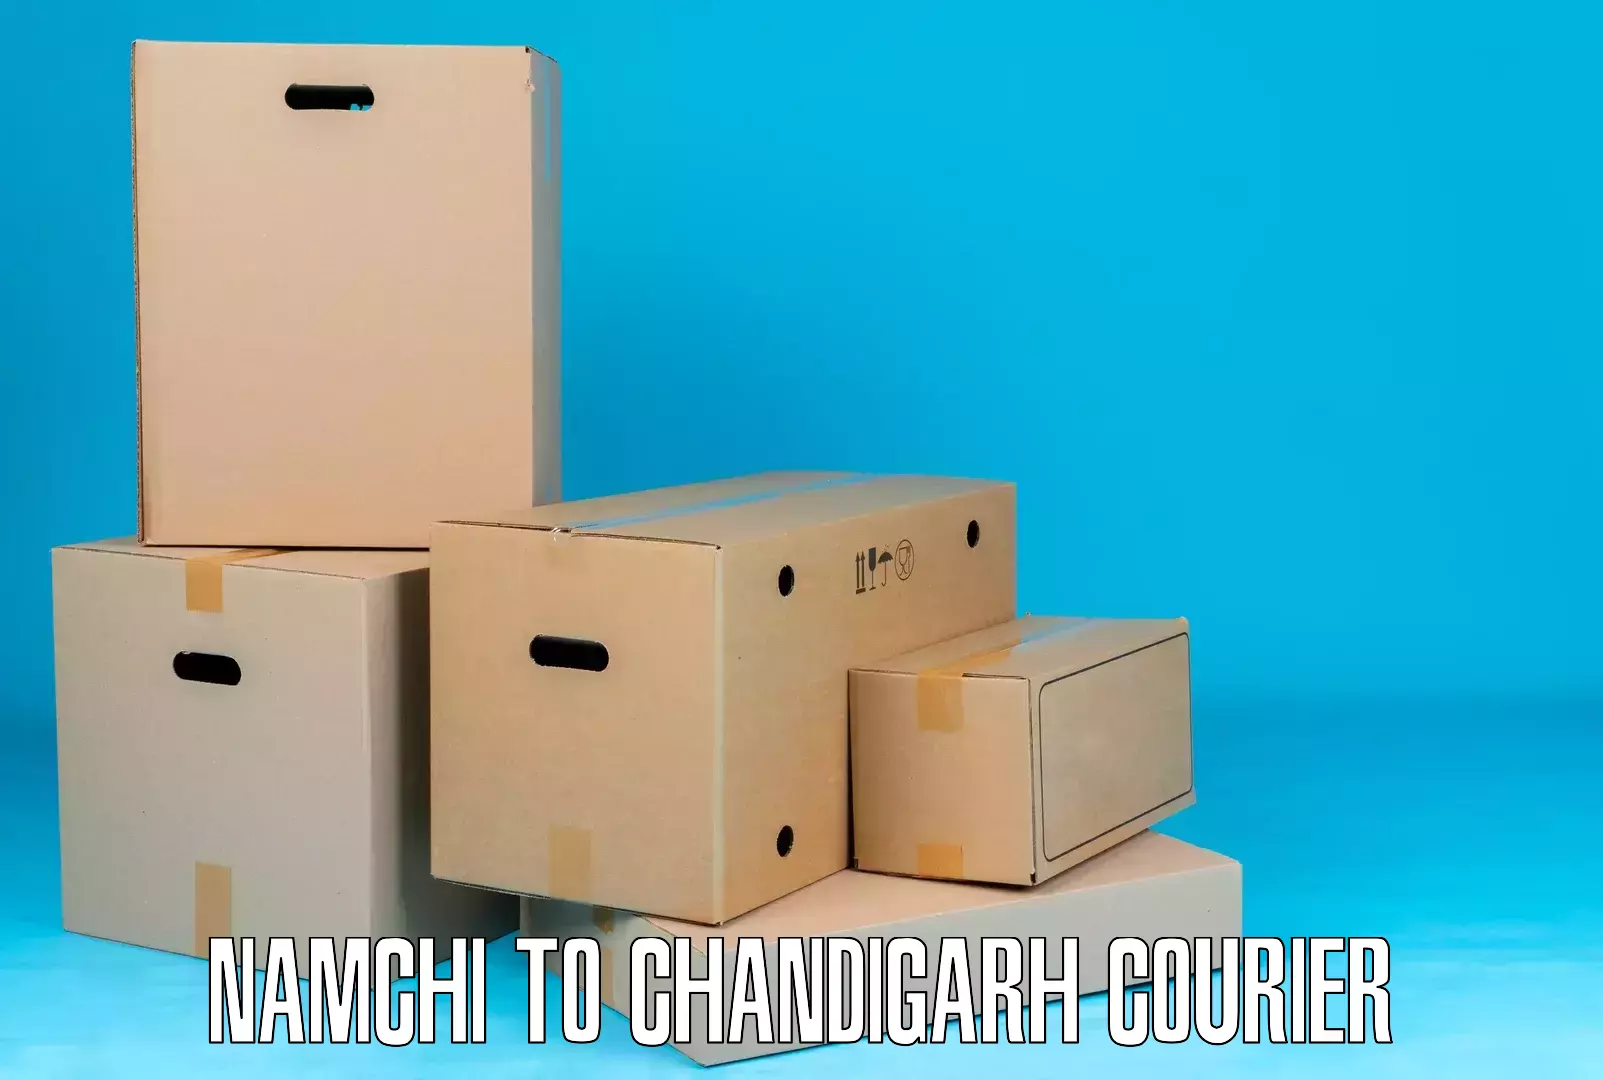 Modern delivery technologies Namchi to Chandigarh